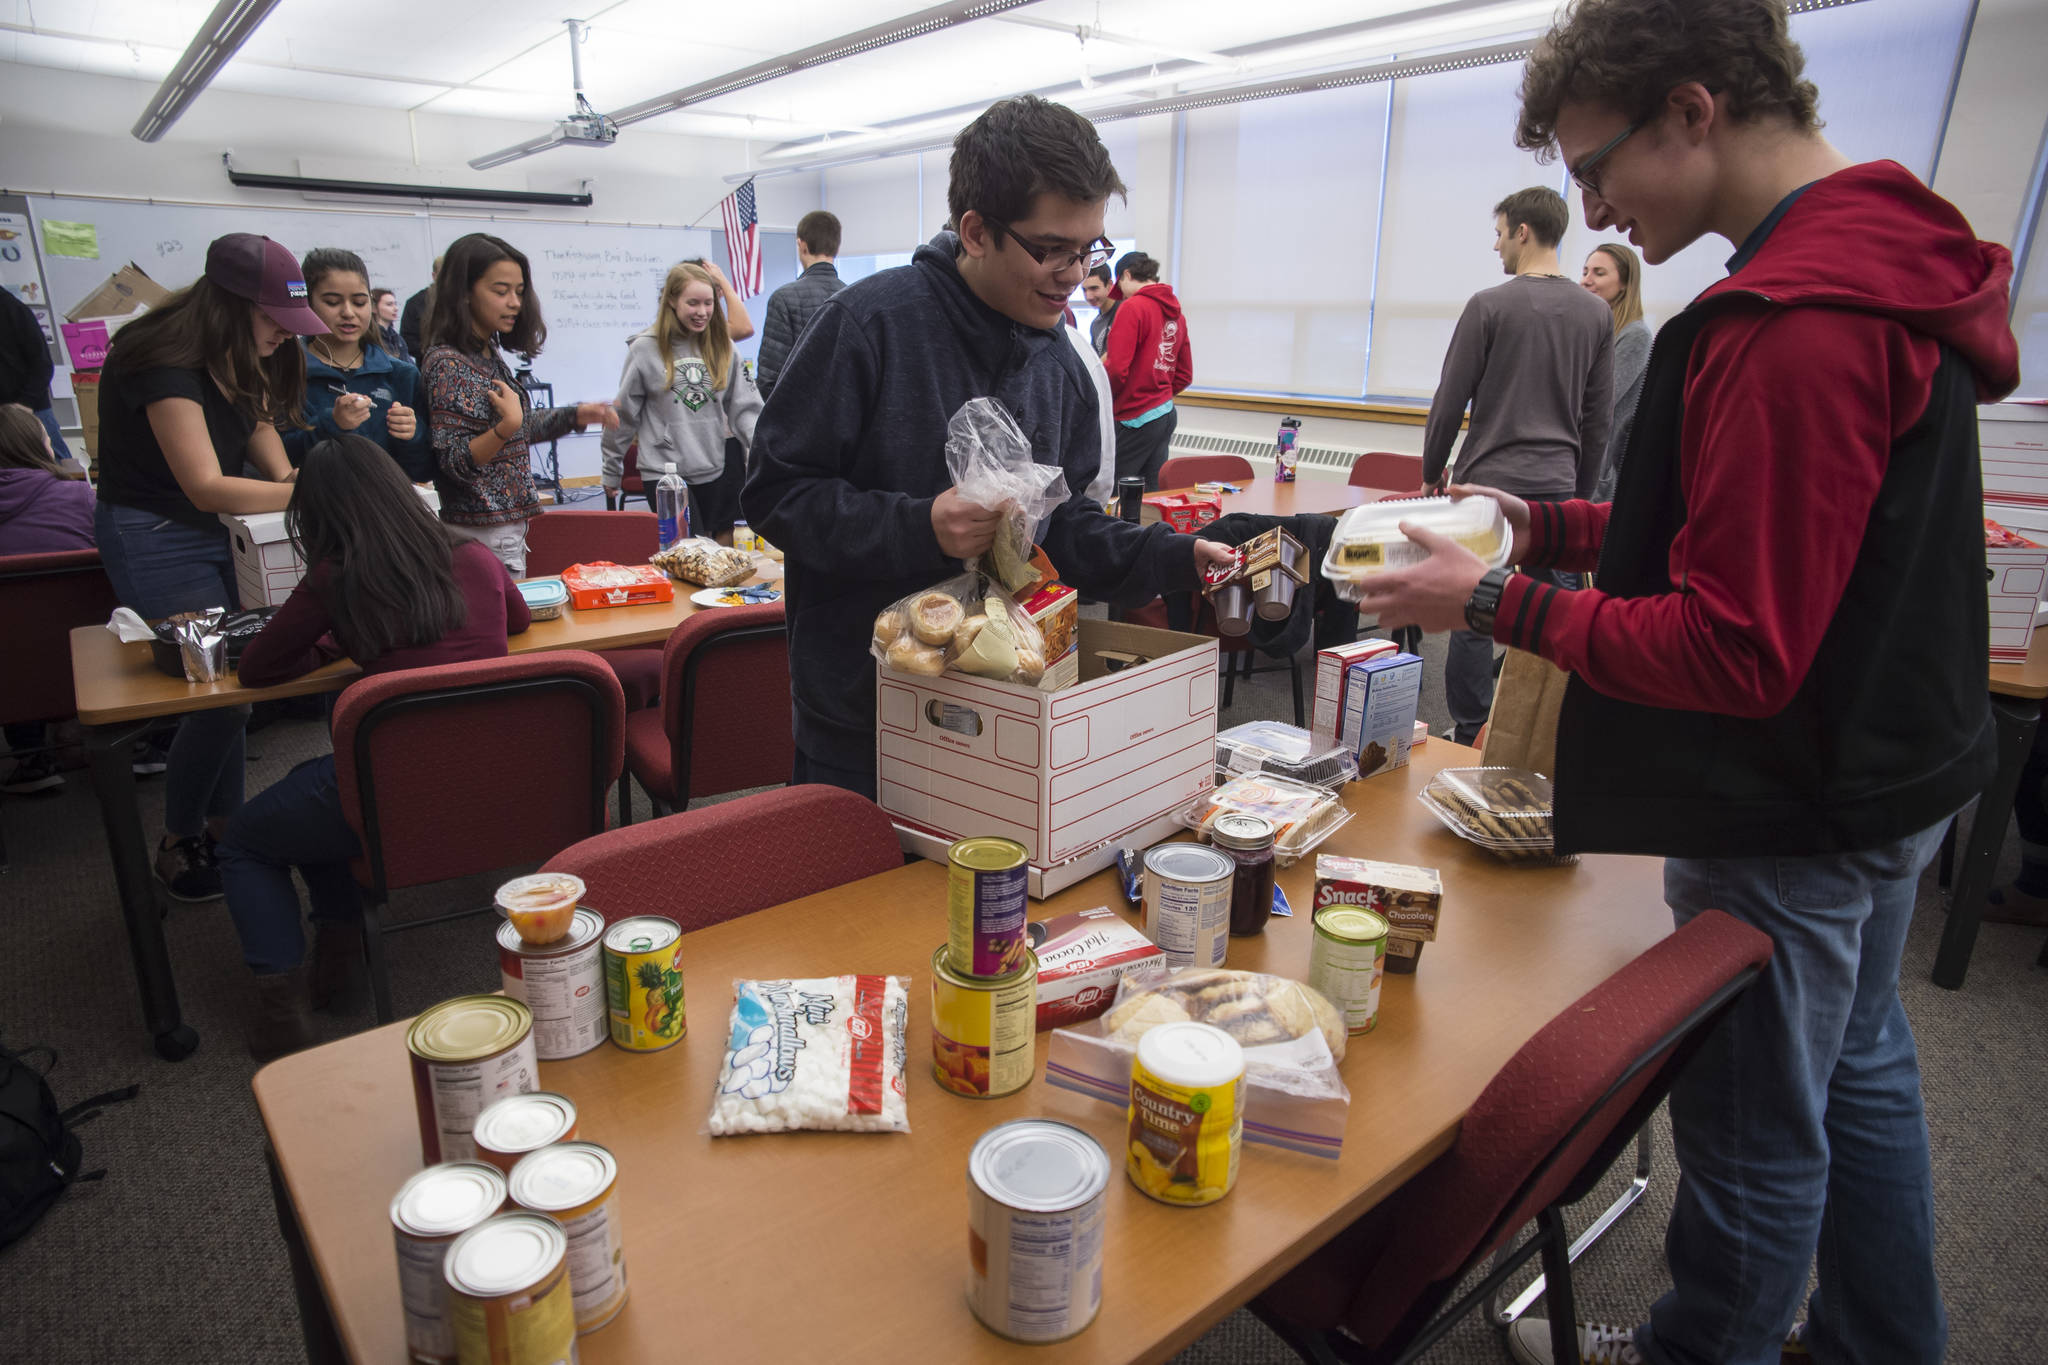 Juneau-Douglas High School senoirs Ramiro Garcia and Steven Ireland-Haight, right, fill a box with Thanksgiving dinner to be donated to AWARE and The Glory Hall on Tuesday, Nov. 20, 2018. The JDHS chapter of Sources of Strength, a nationwide organization that promotes positivity in schools donated seven boxes to the organizations. Students from every homeroom contributed food. (Michael Penn | Juneau Empire)